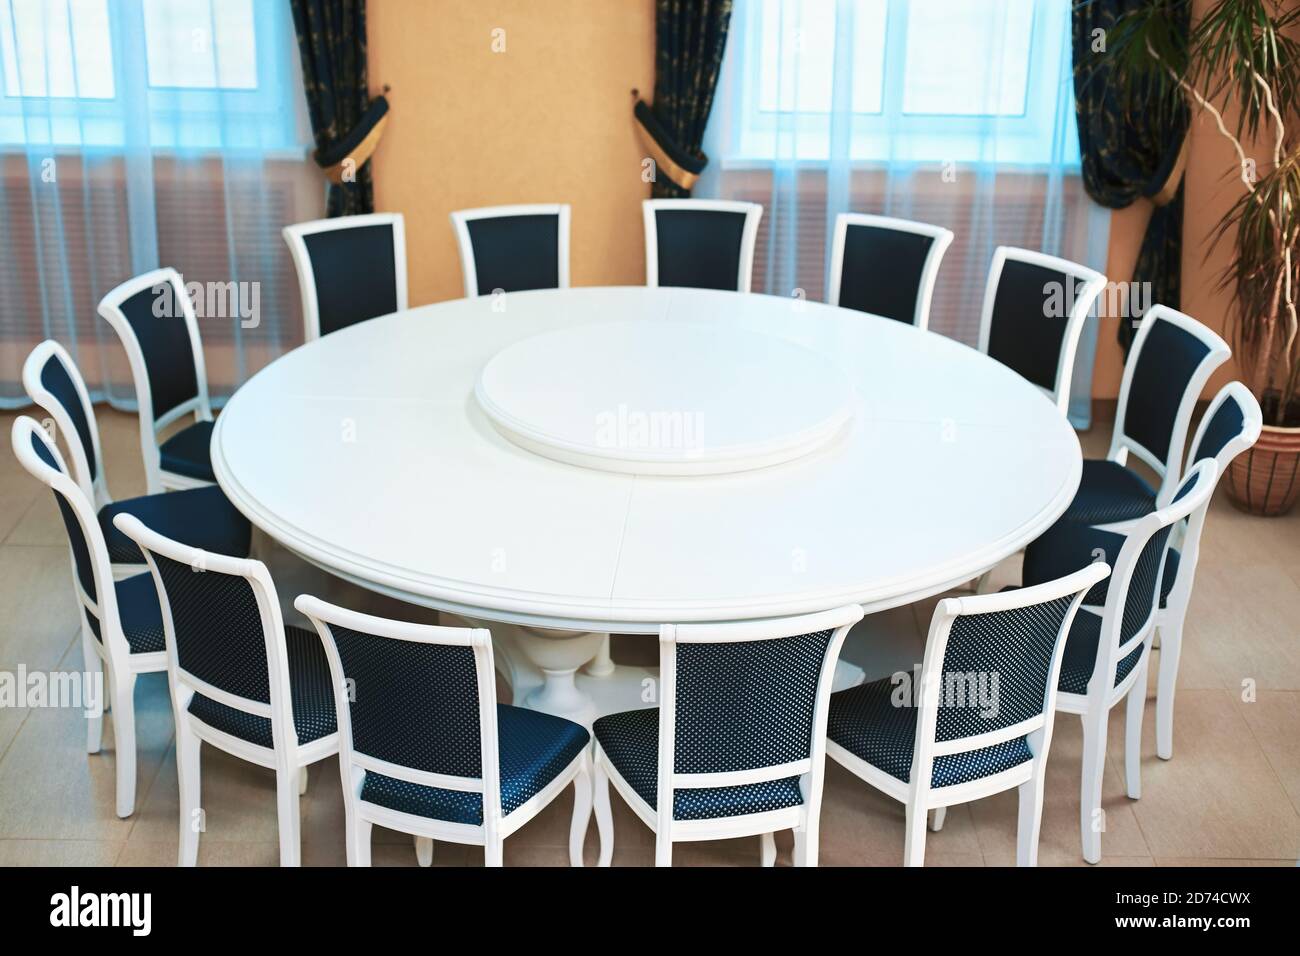 Empty white round conference table and chairs. Diplomatic background. Stock Photo